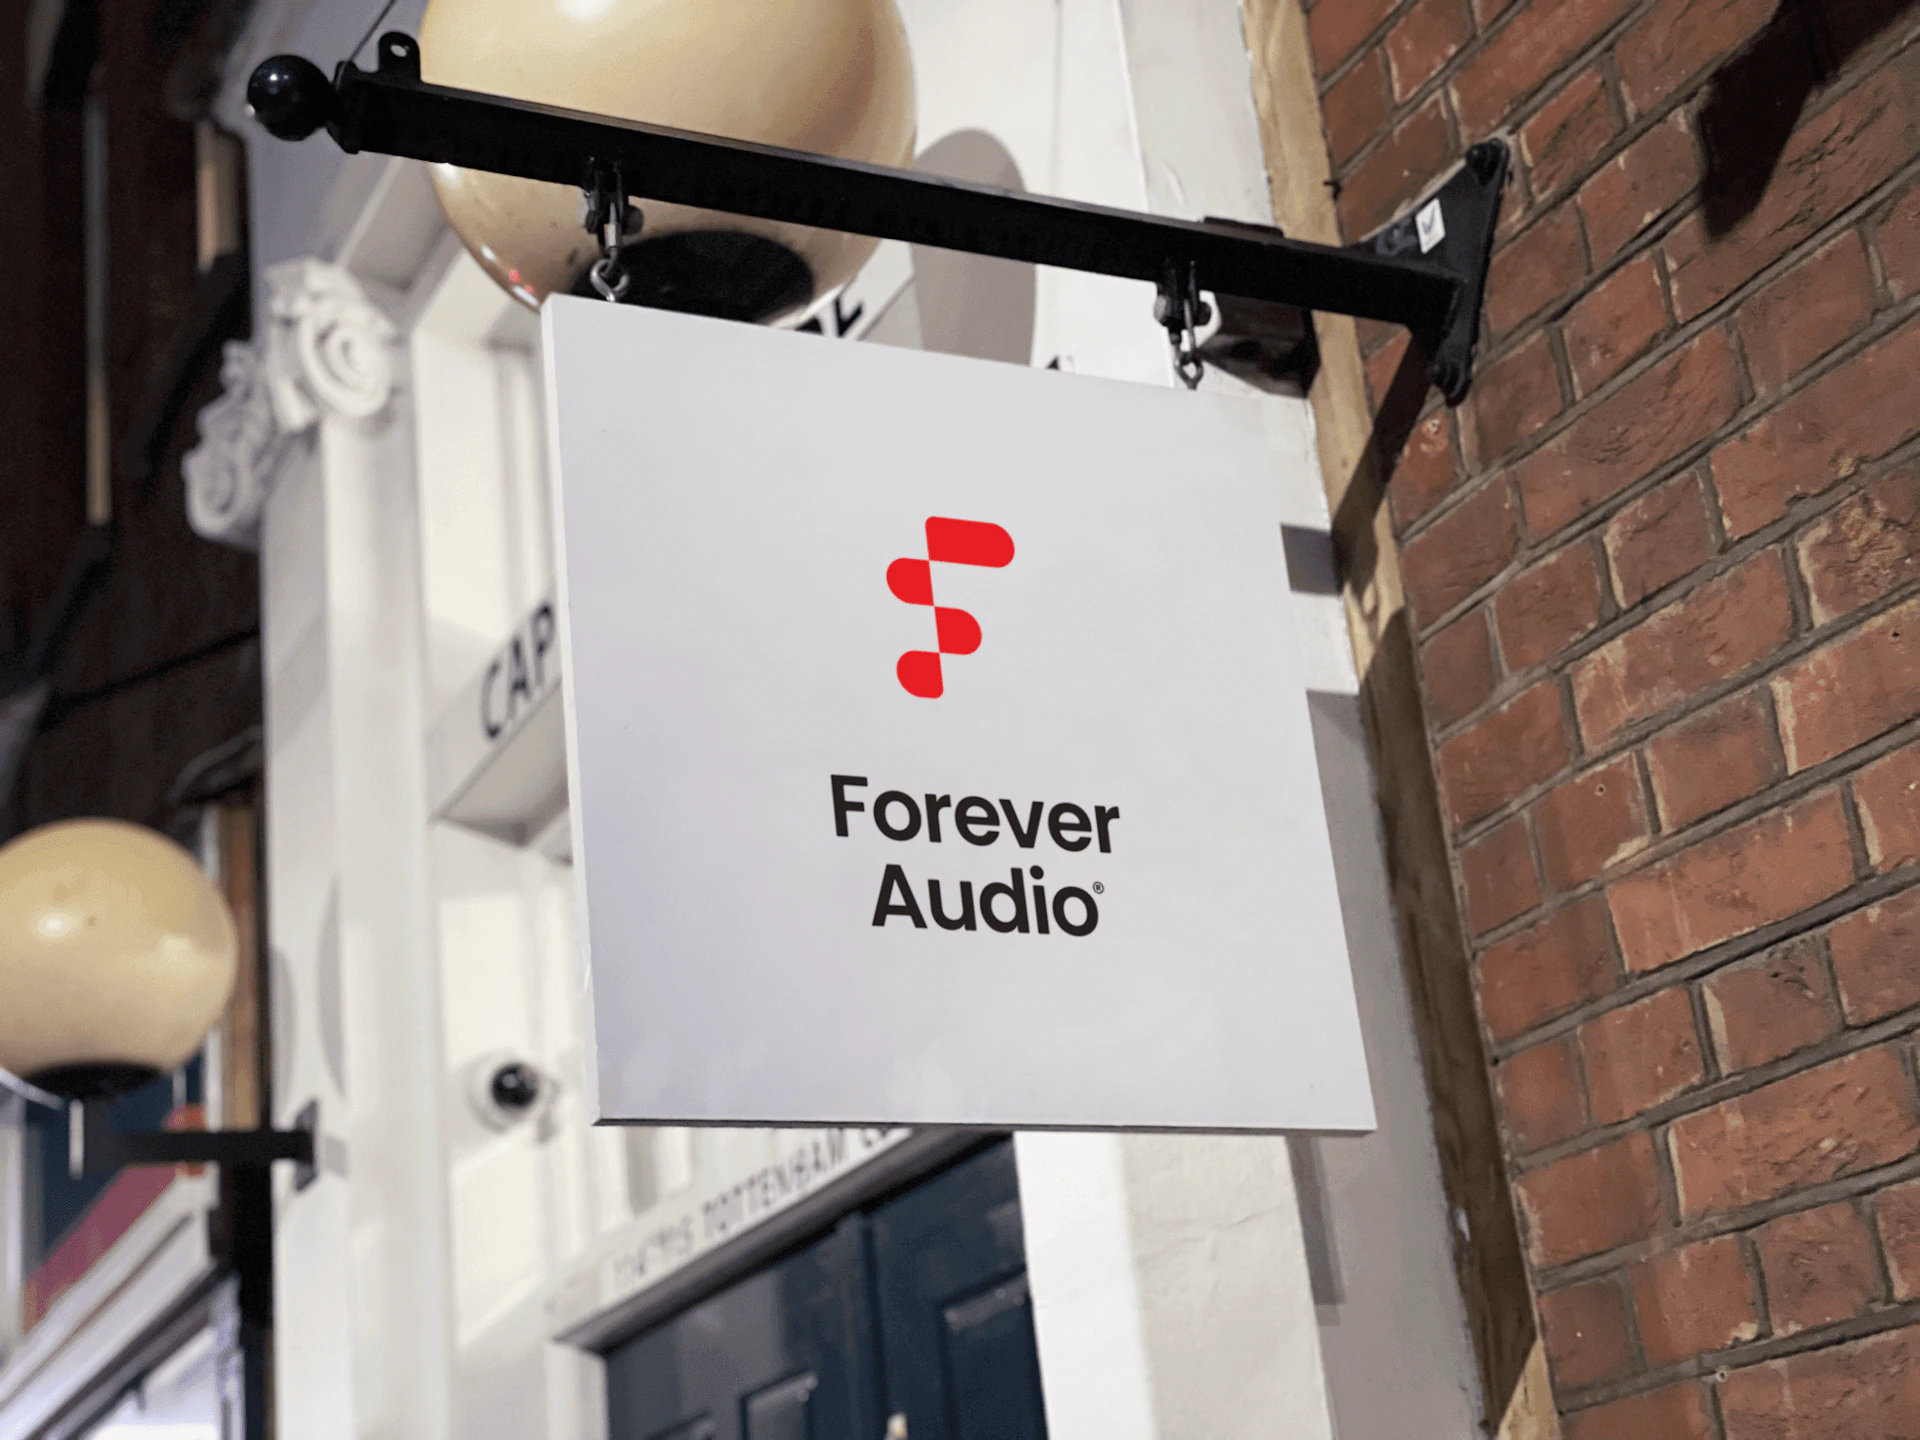 Forever Audio building sign in London